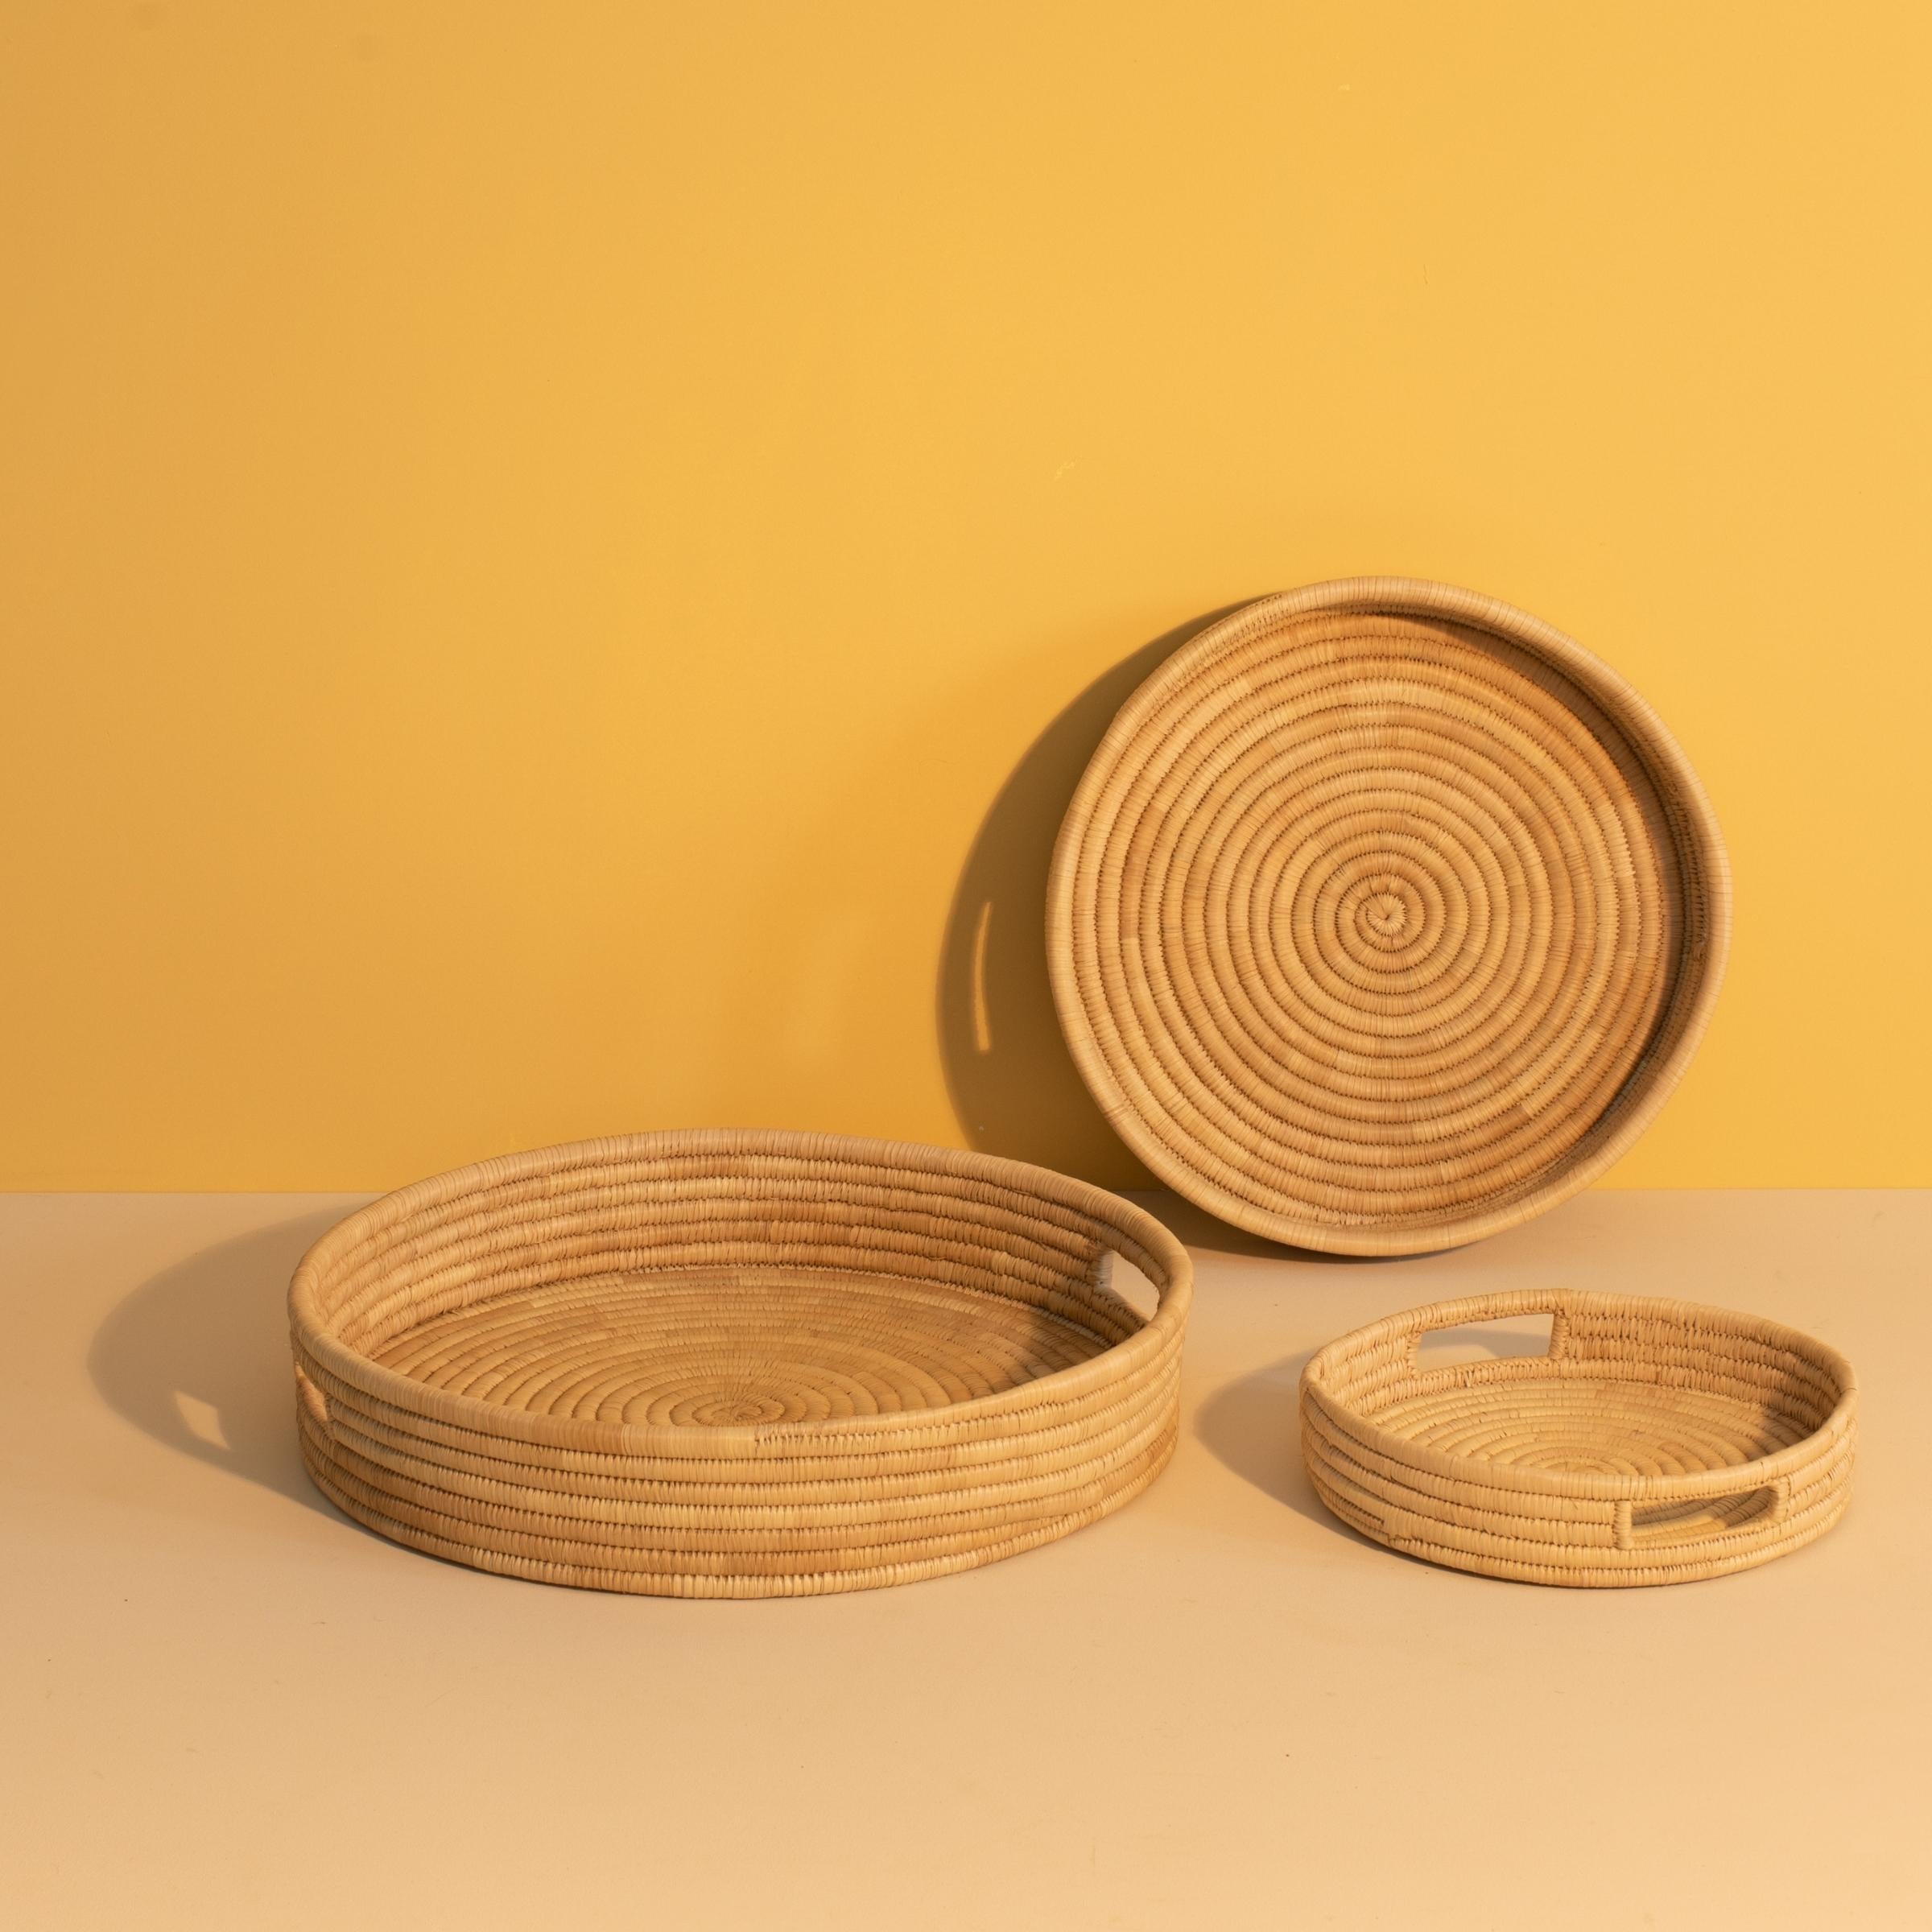 Minimalist and sturdy tray "Umi" is carefully woven from palm leaves. Available in three sizes.